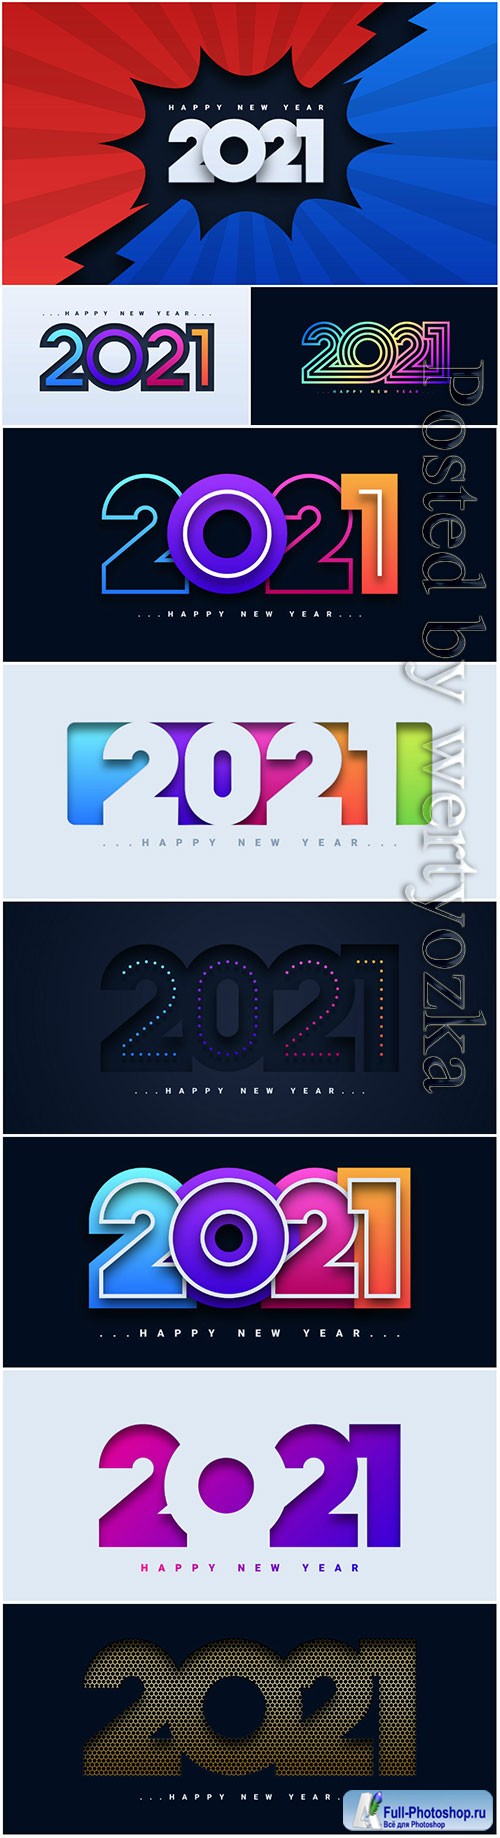 Abstract colorful 2021 happy new year vector background